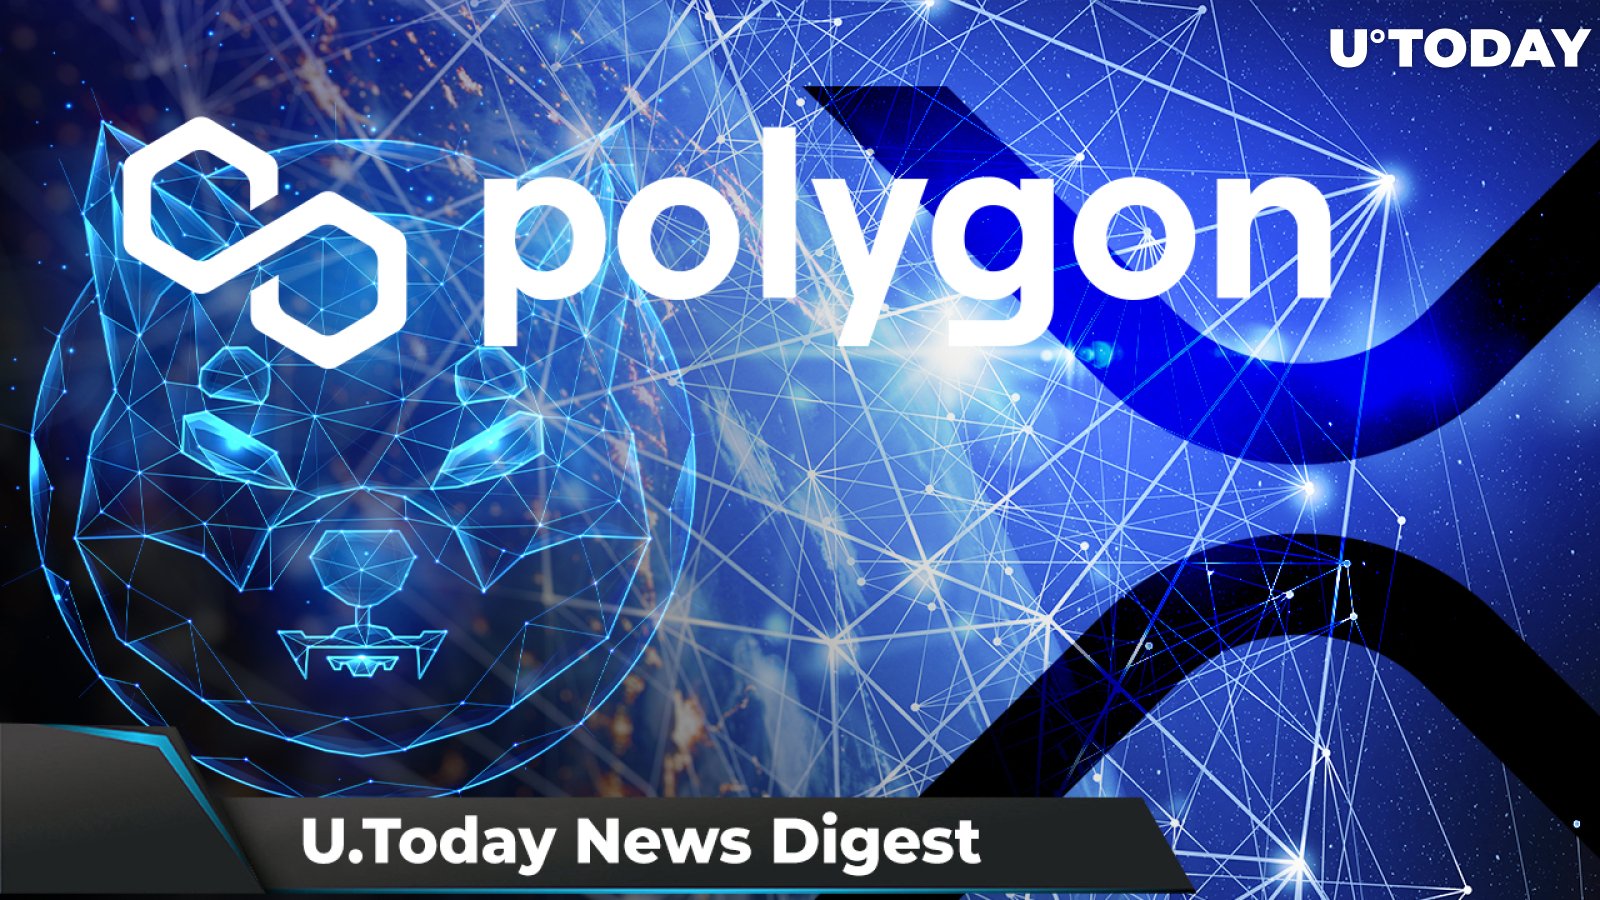 Polygon Teases 3 Milestones for 2022, XRP Forms “Death Crosses” Pattern, SHIB and ADA Present Buying Opportunity: Crypto News Digest by U.Today